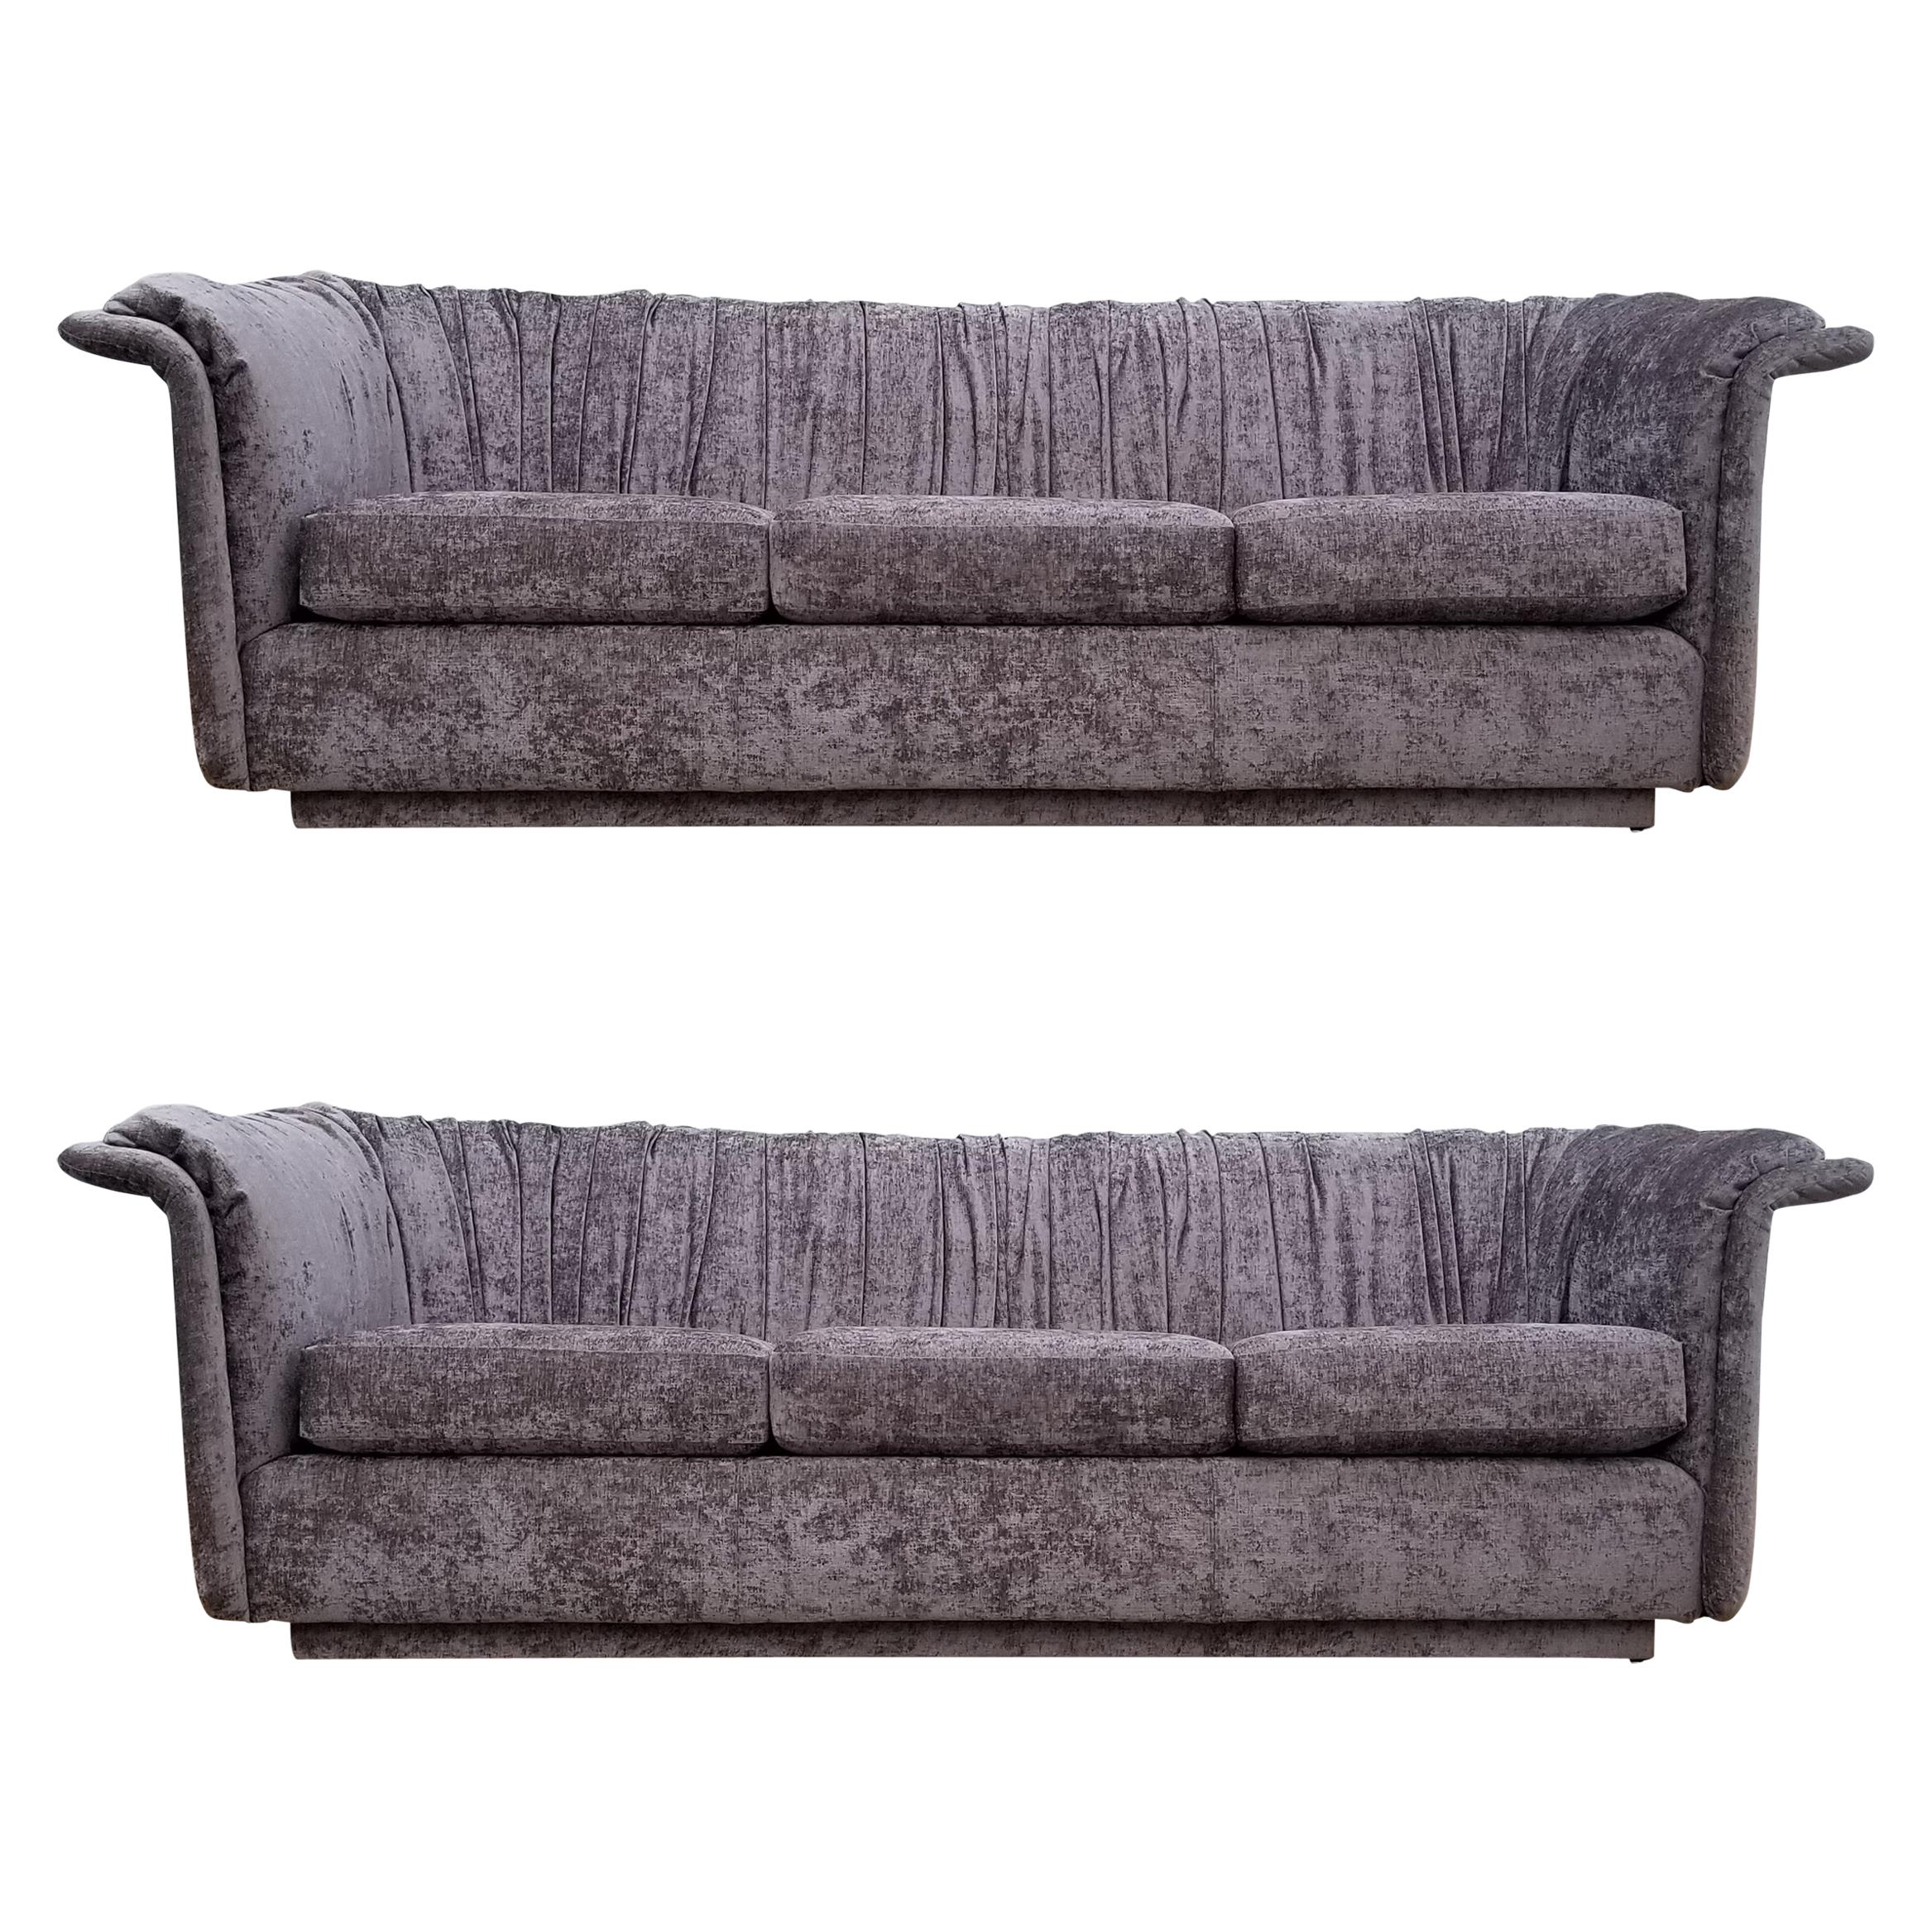 Pair of Directional Sofas